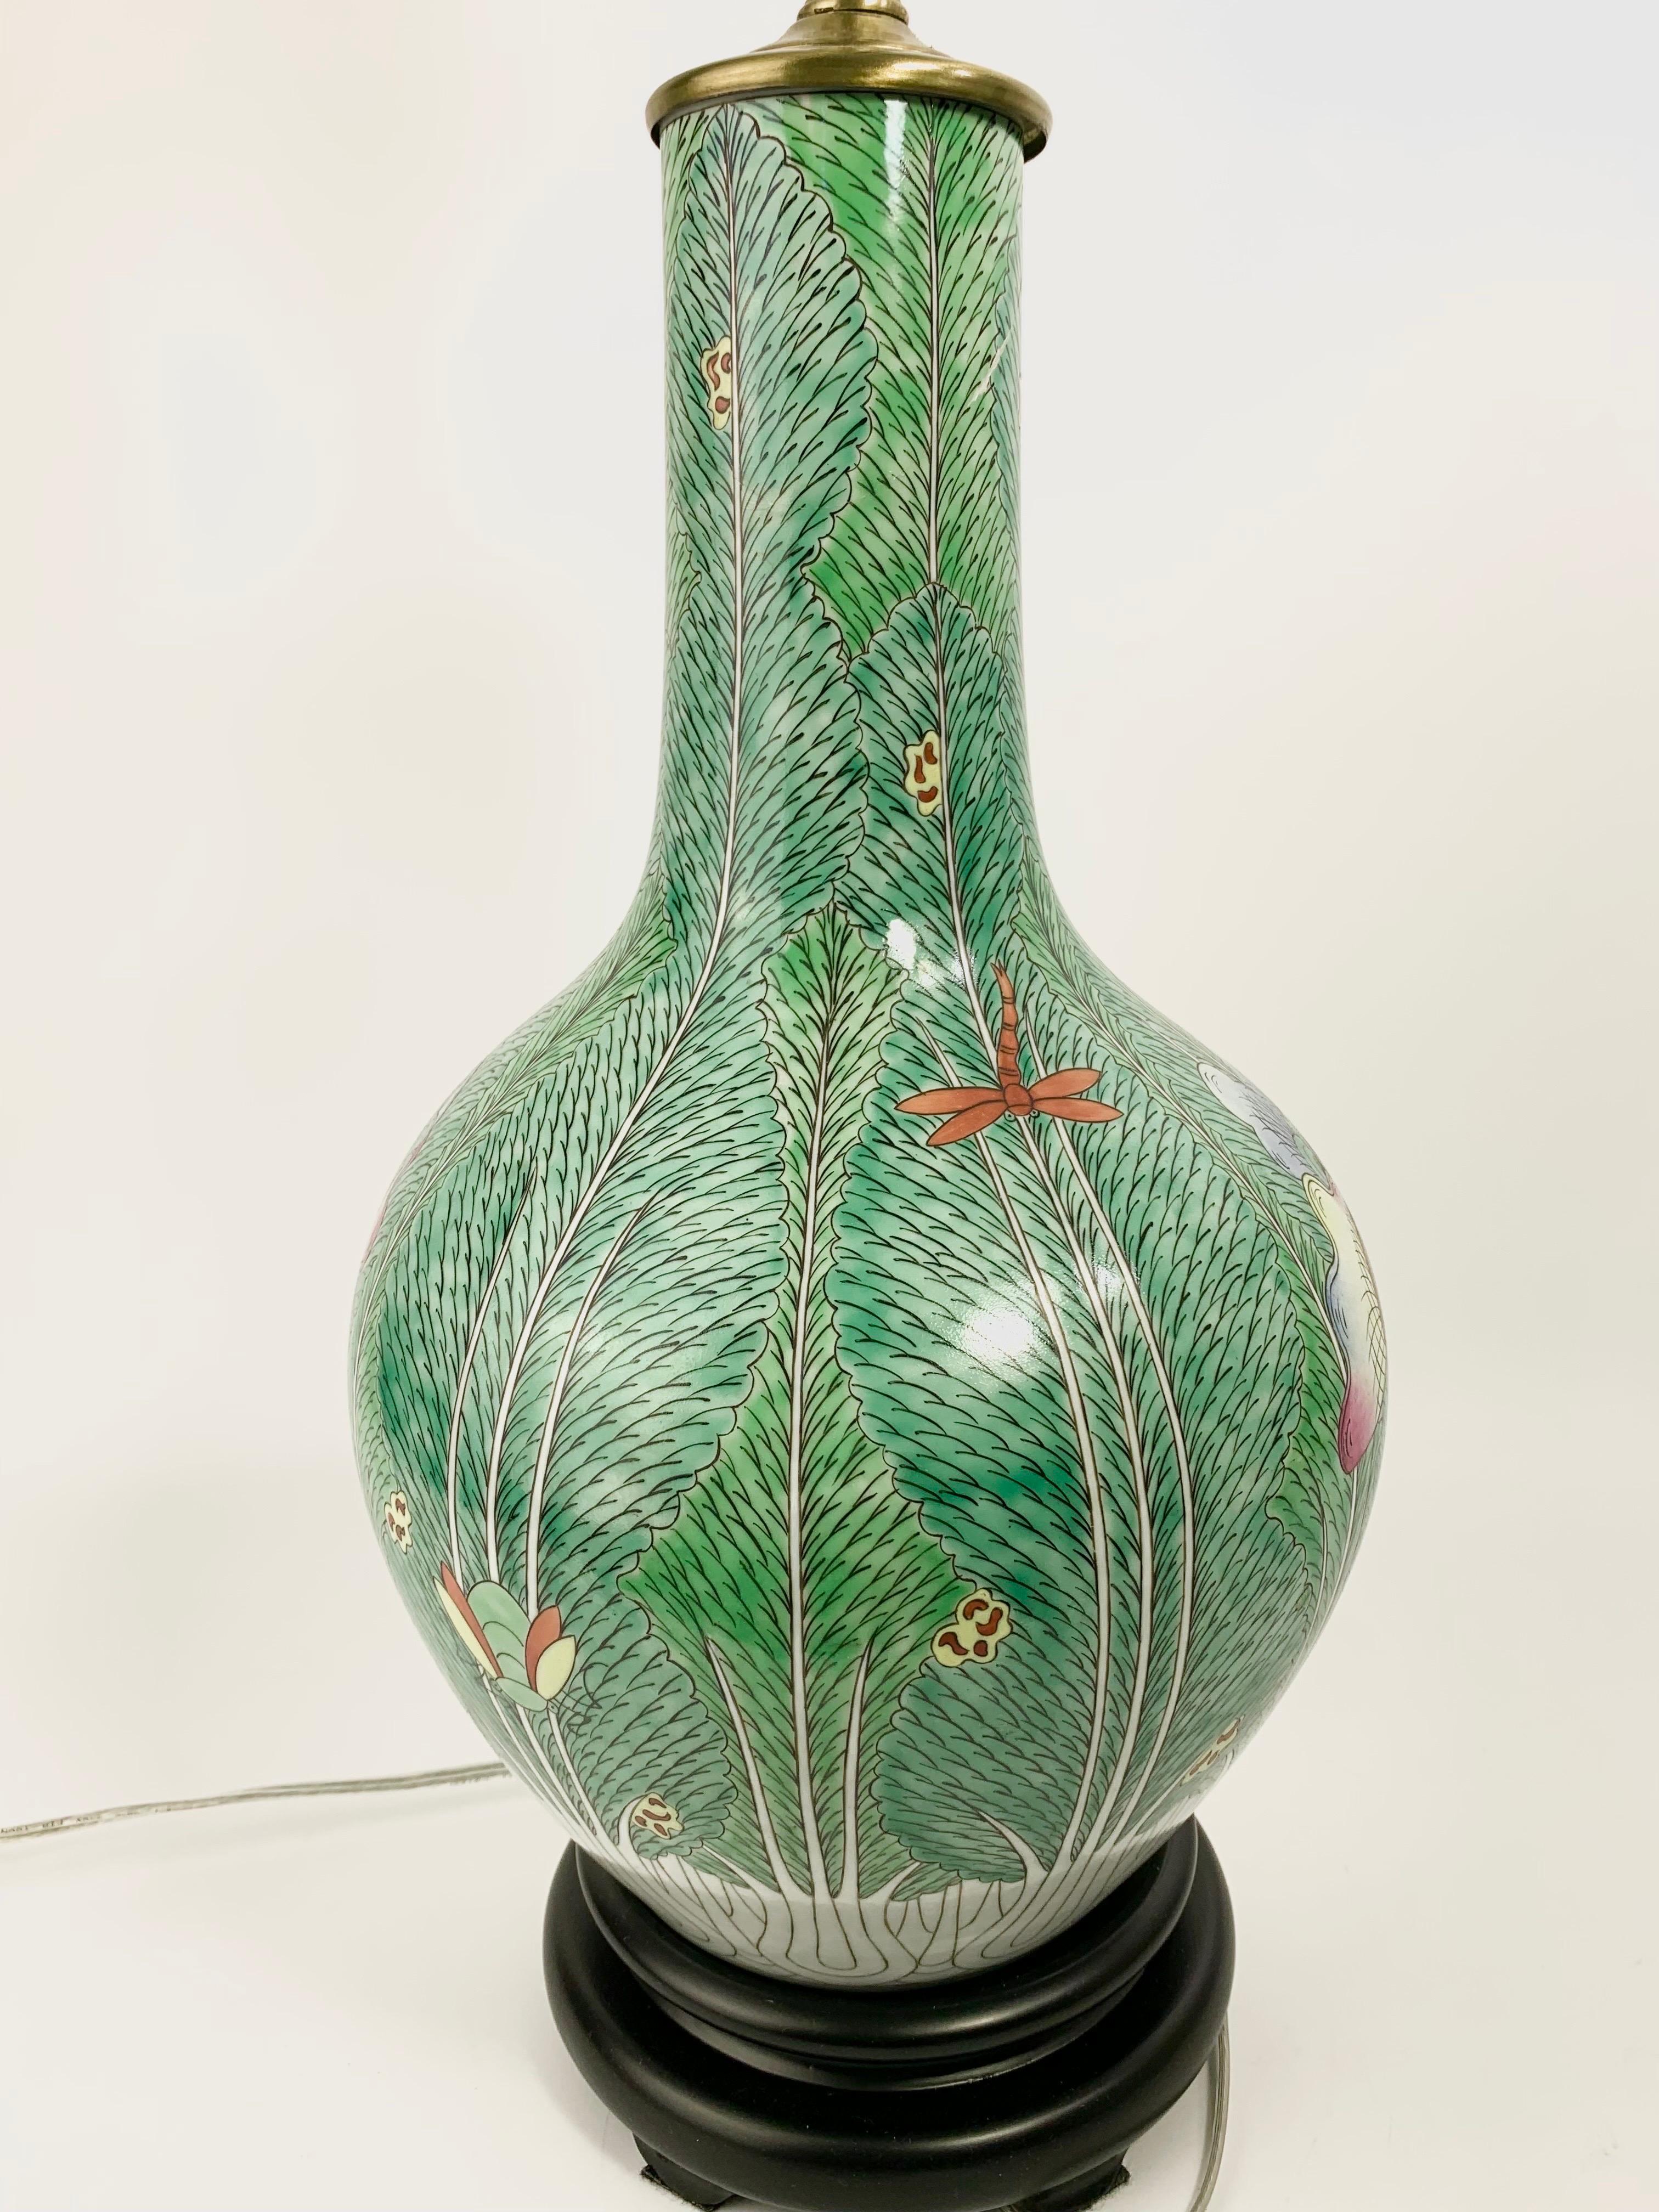 Chinoiserie chinoiserie Famille Verte Green Bok Choy Butterfuly Ceramic Vase Table Lamp For Sale